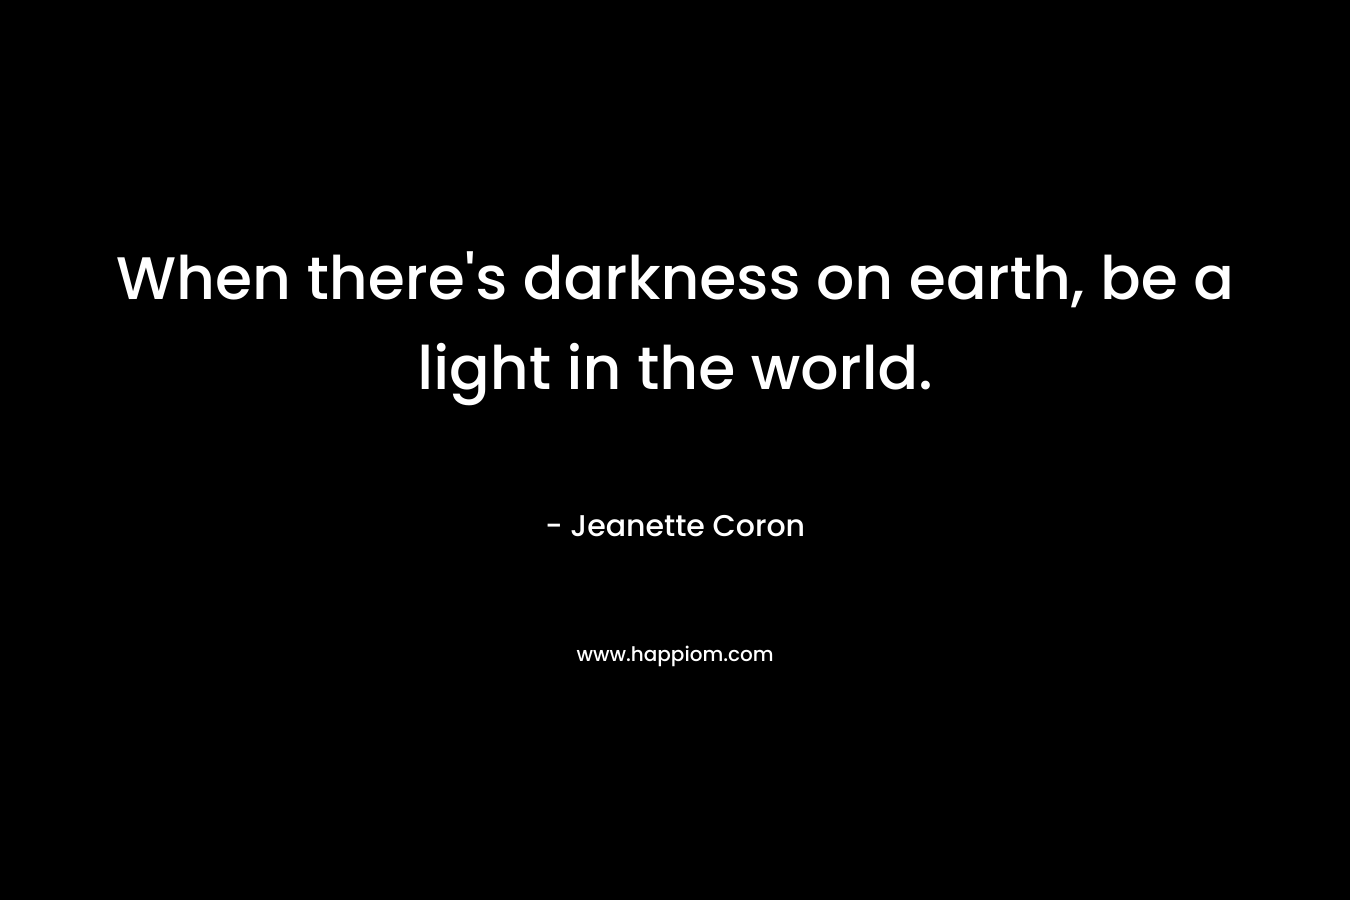 When there's darkness on earth, be a light in the world.